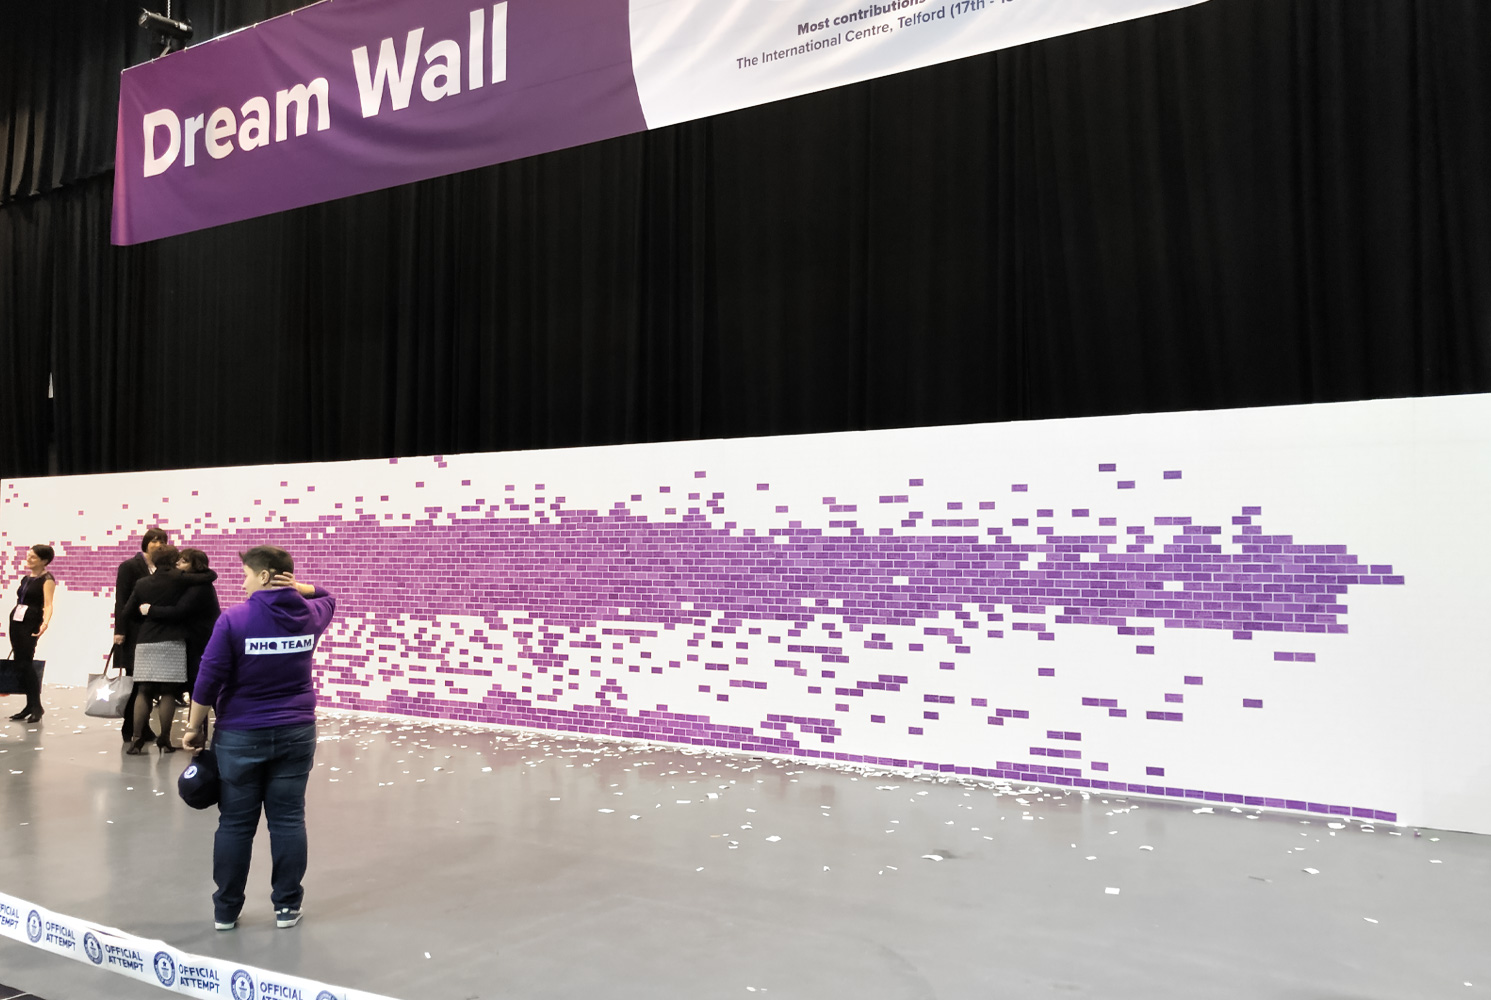 guinness record attempt dream wall